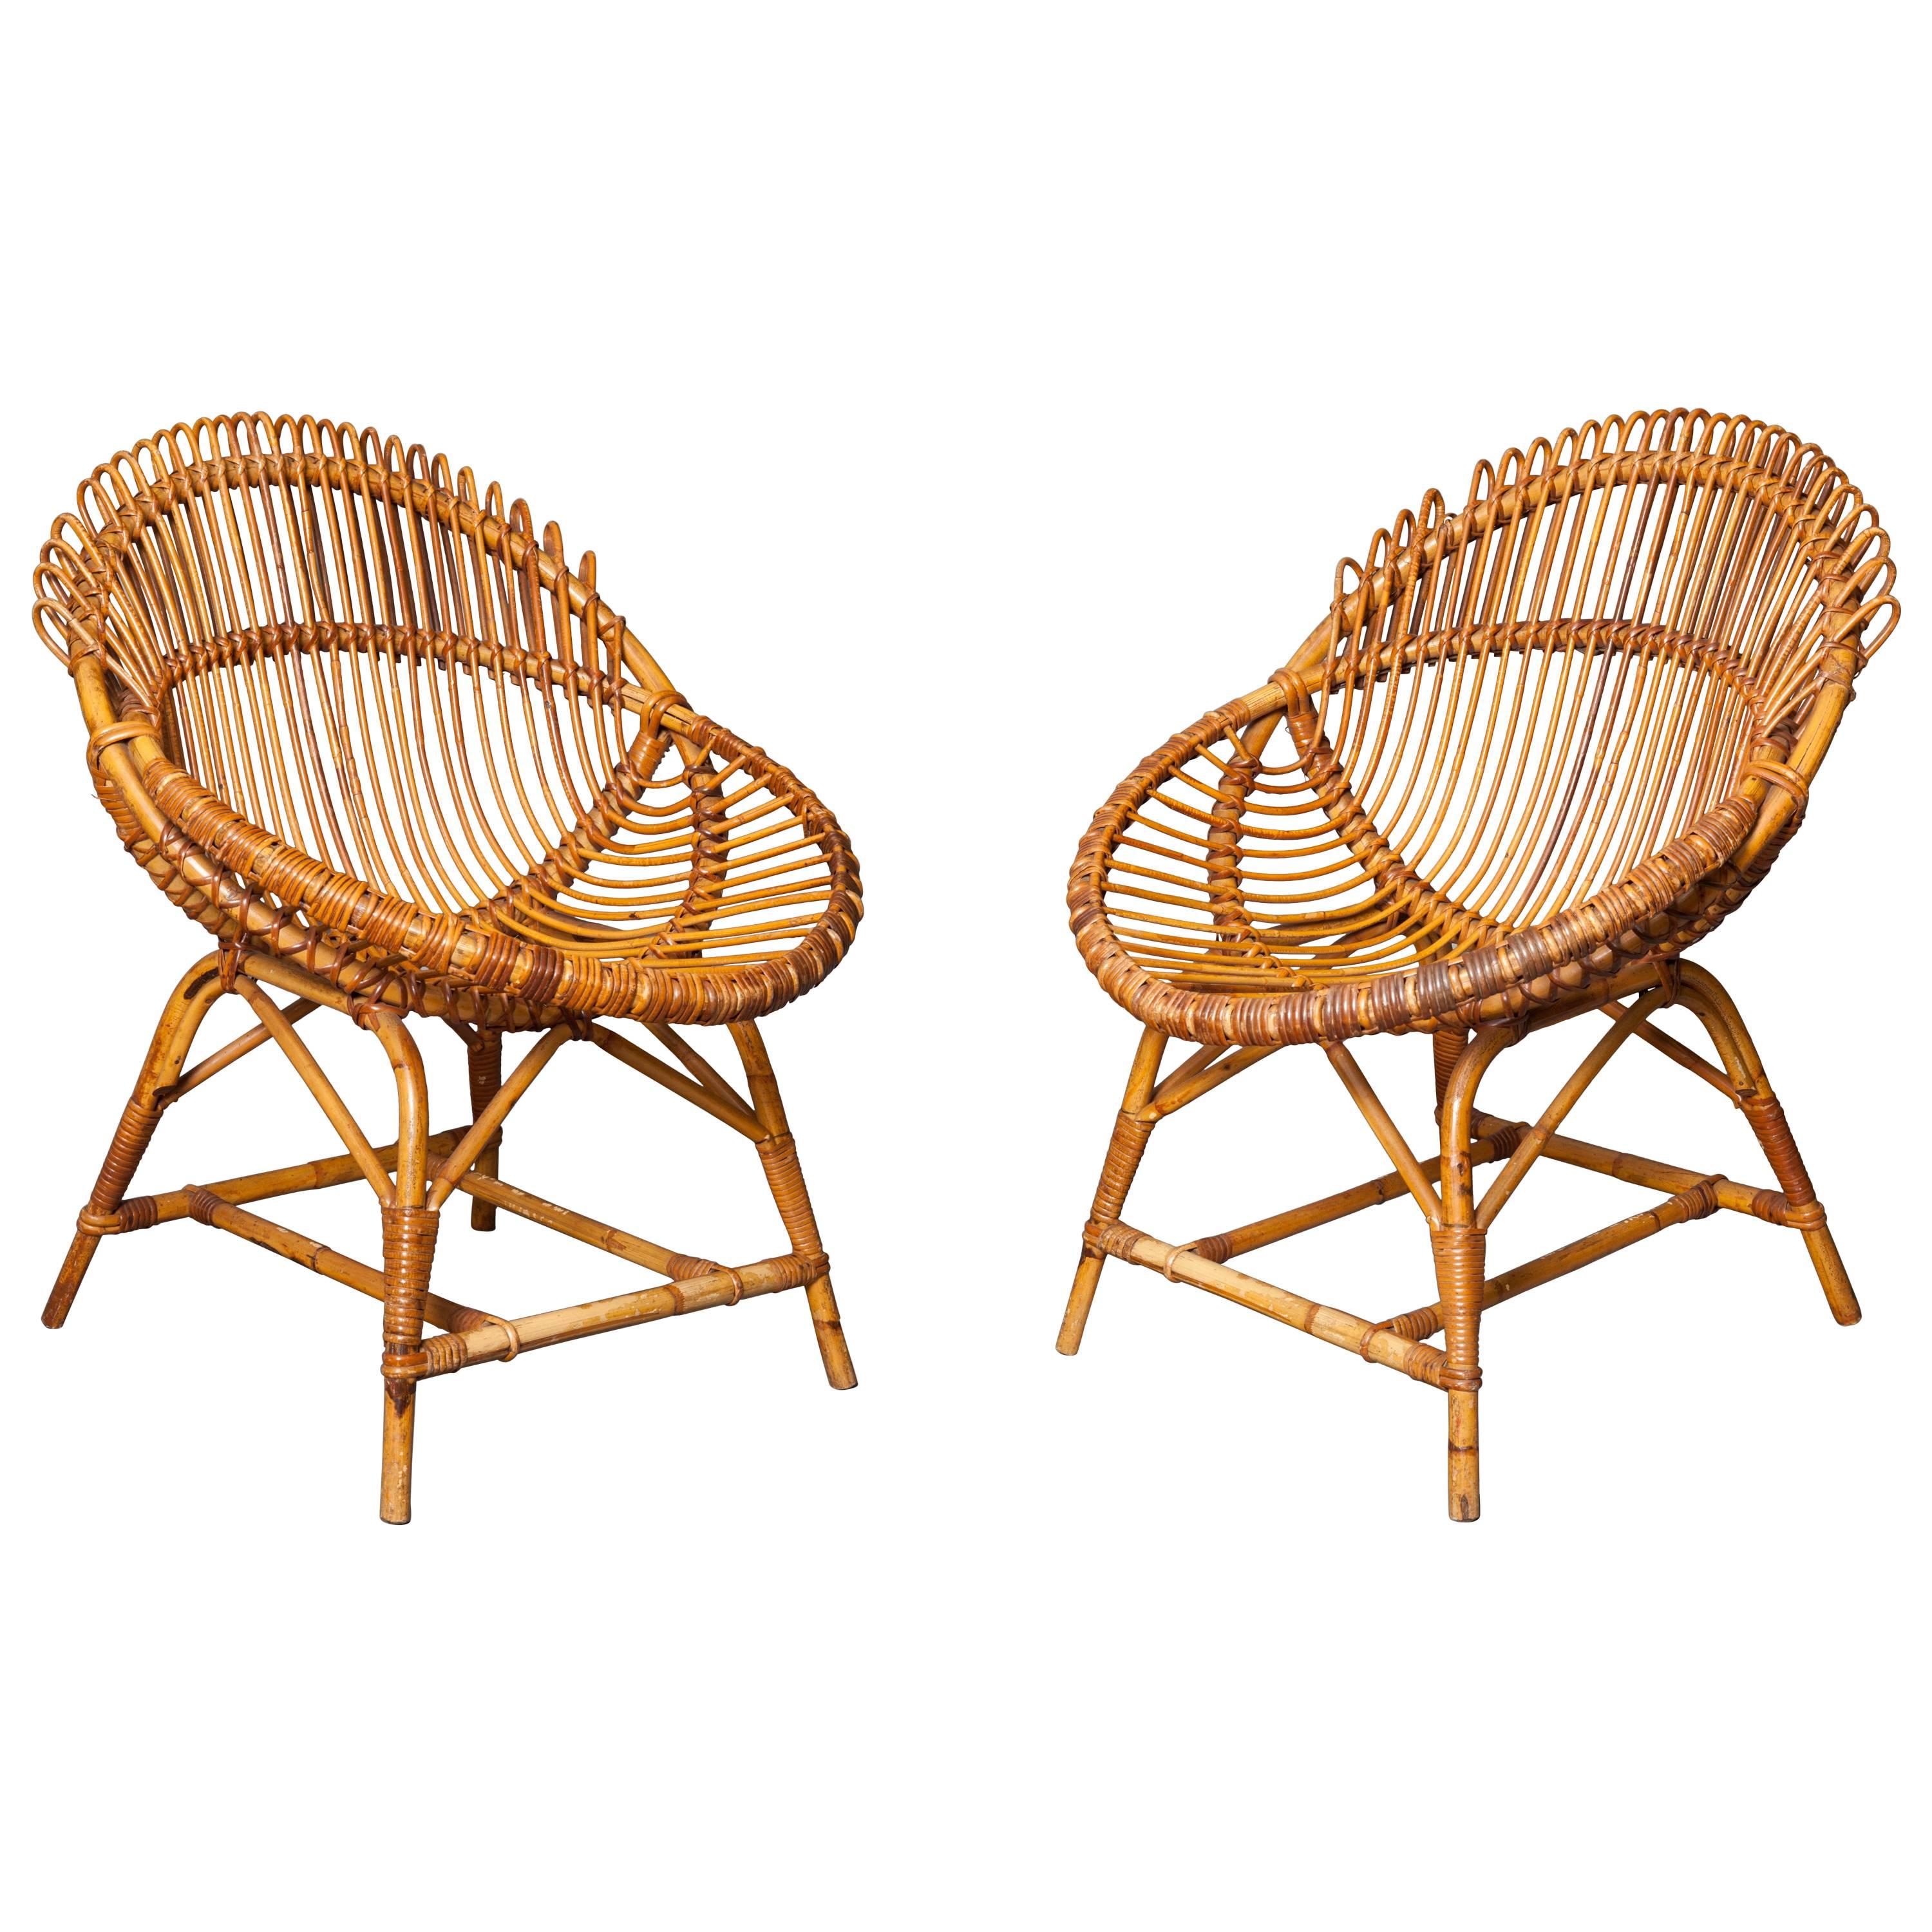 Pair of 20th Century Italian Wicker Chairs, 1960s For Sale